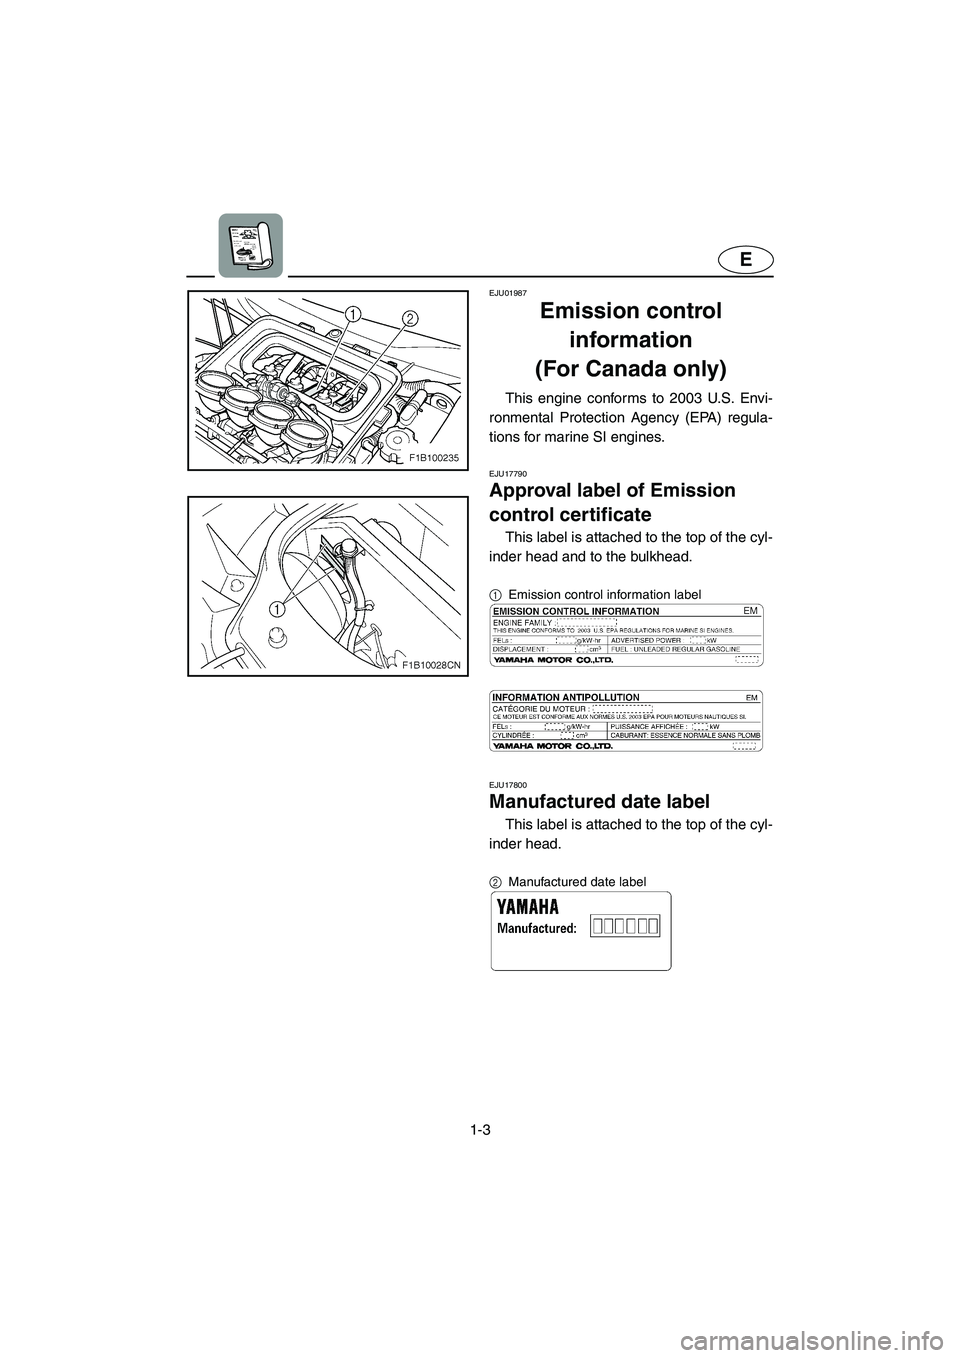 YAMAHA FX 2003  Owners Manual 1-3
E
EJU01987
Emission control 
information 
(For Canada only) 
This engine conforms to 2003 U.S. Envi-
ronmental Protection Agency (EPA) regula-
tions for marine SI engines.
EJU17790
Approval label 